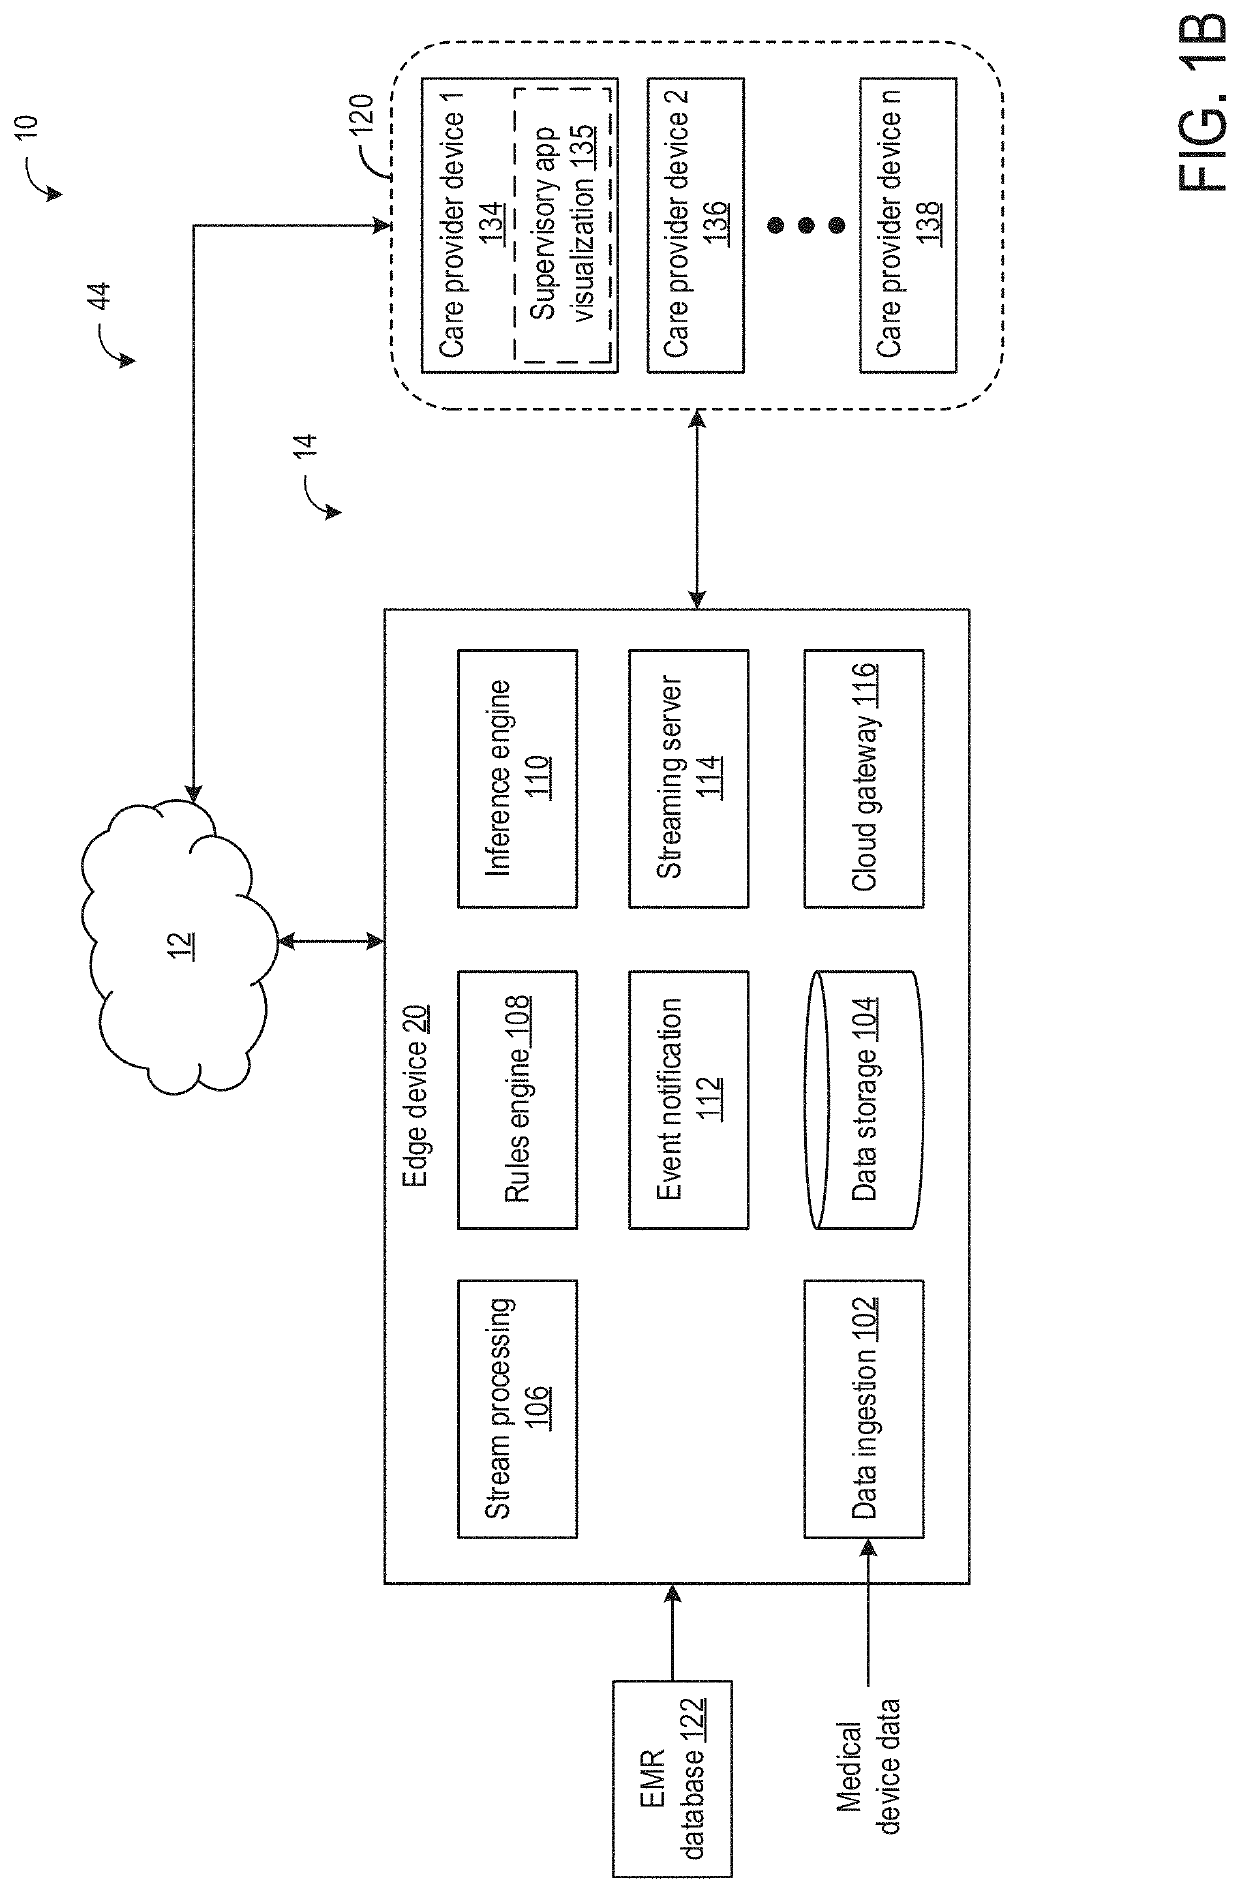 Systems and methods for graphical user interfaces for medical device trends